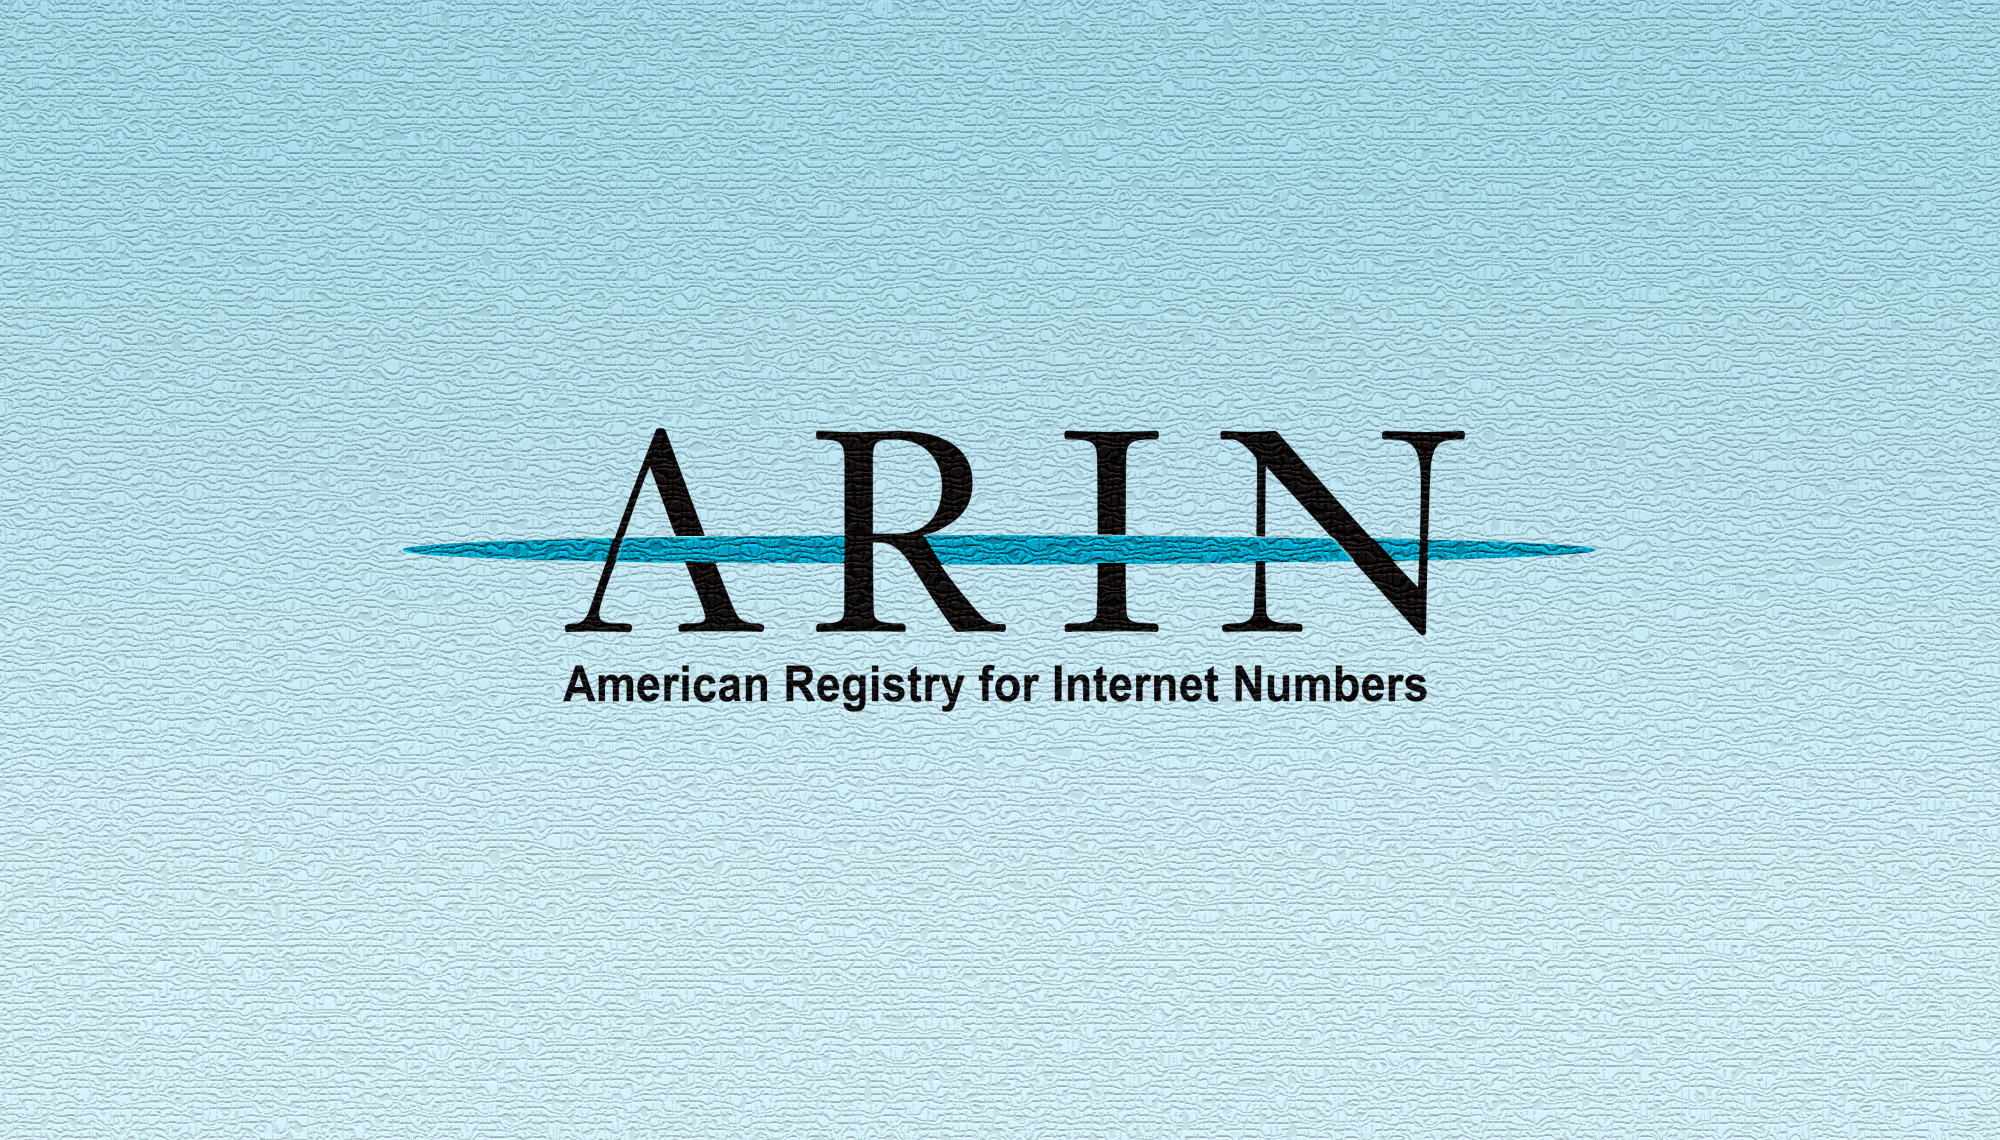 What to Expect at ARIN 31: Policy Discussions, Networking Opportunities, and More